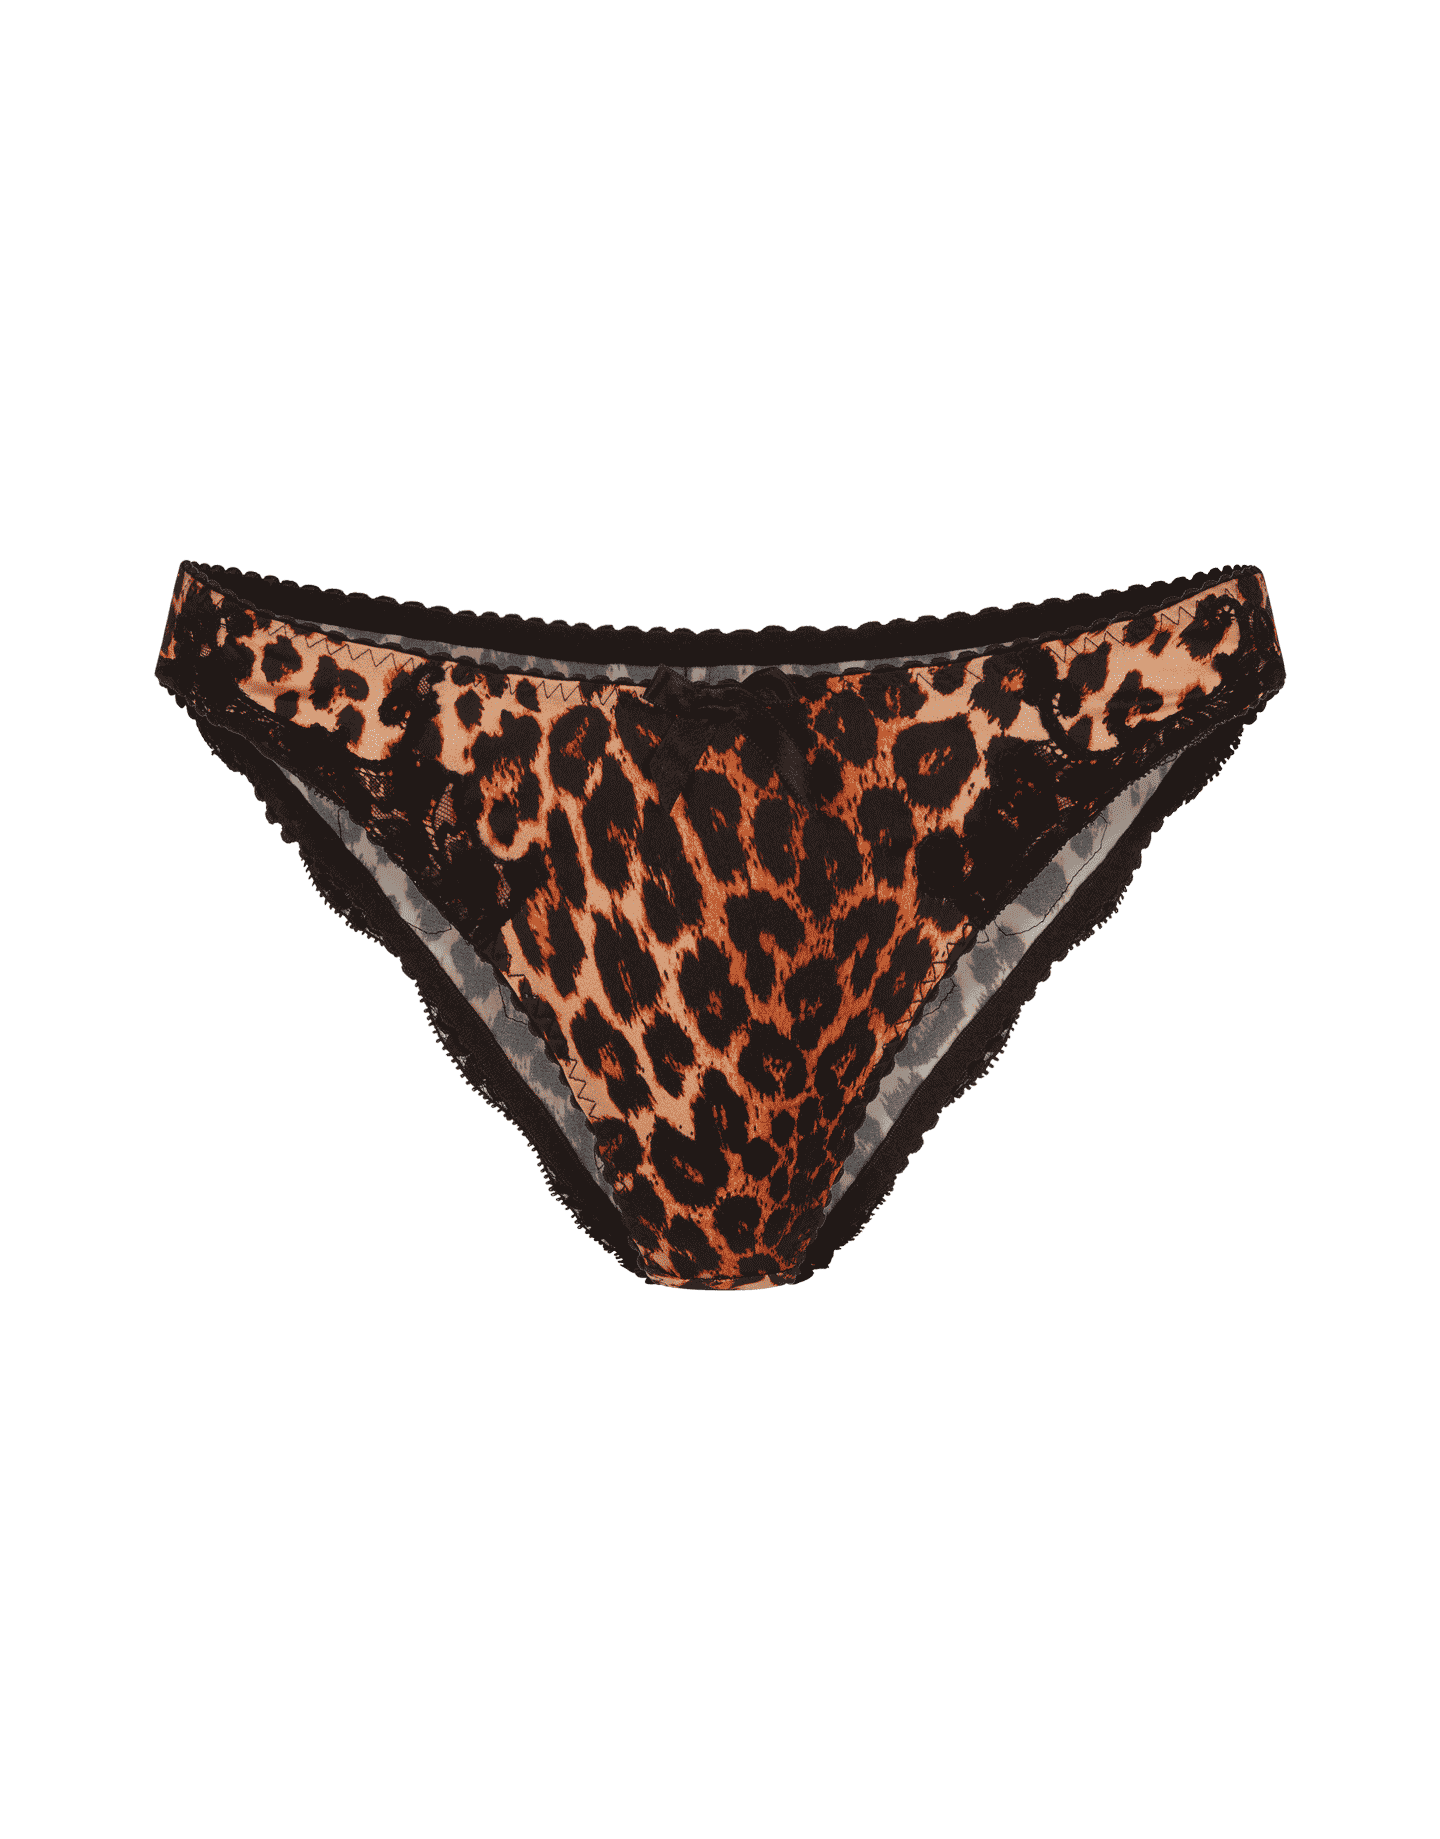 Molly Full Brief in Leopard | Agent Provocateur All Lingerie